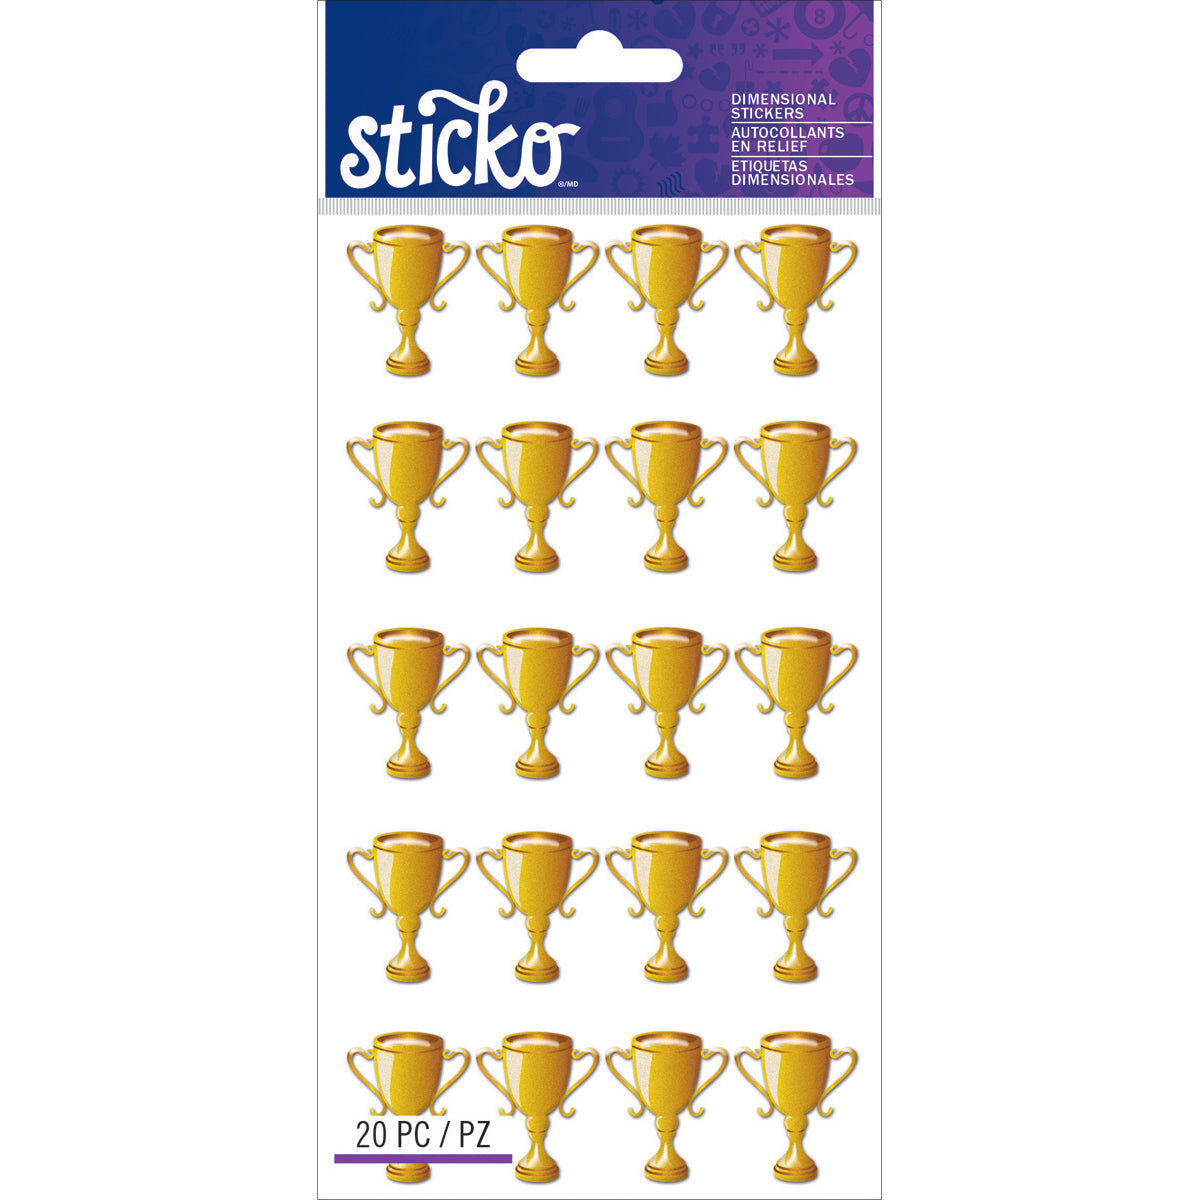 Sticko Dimensional Stickers-Trophies